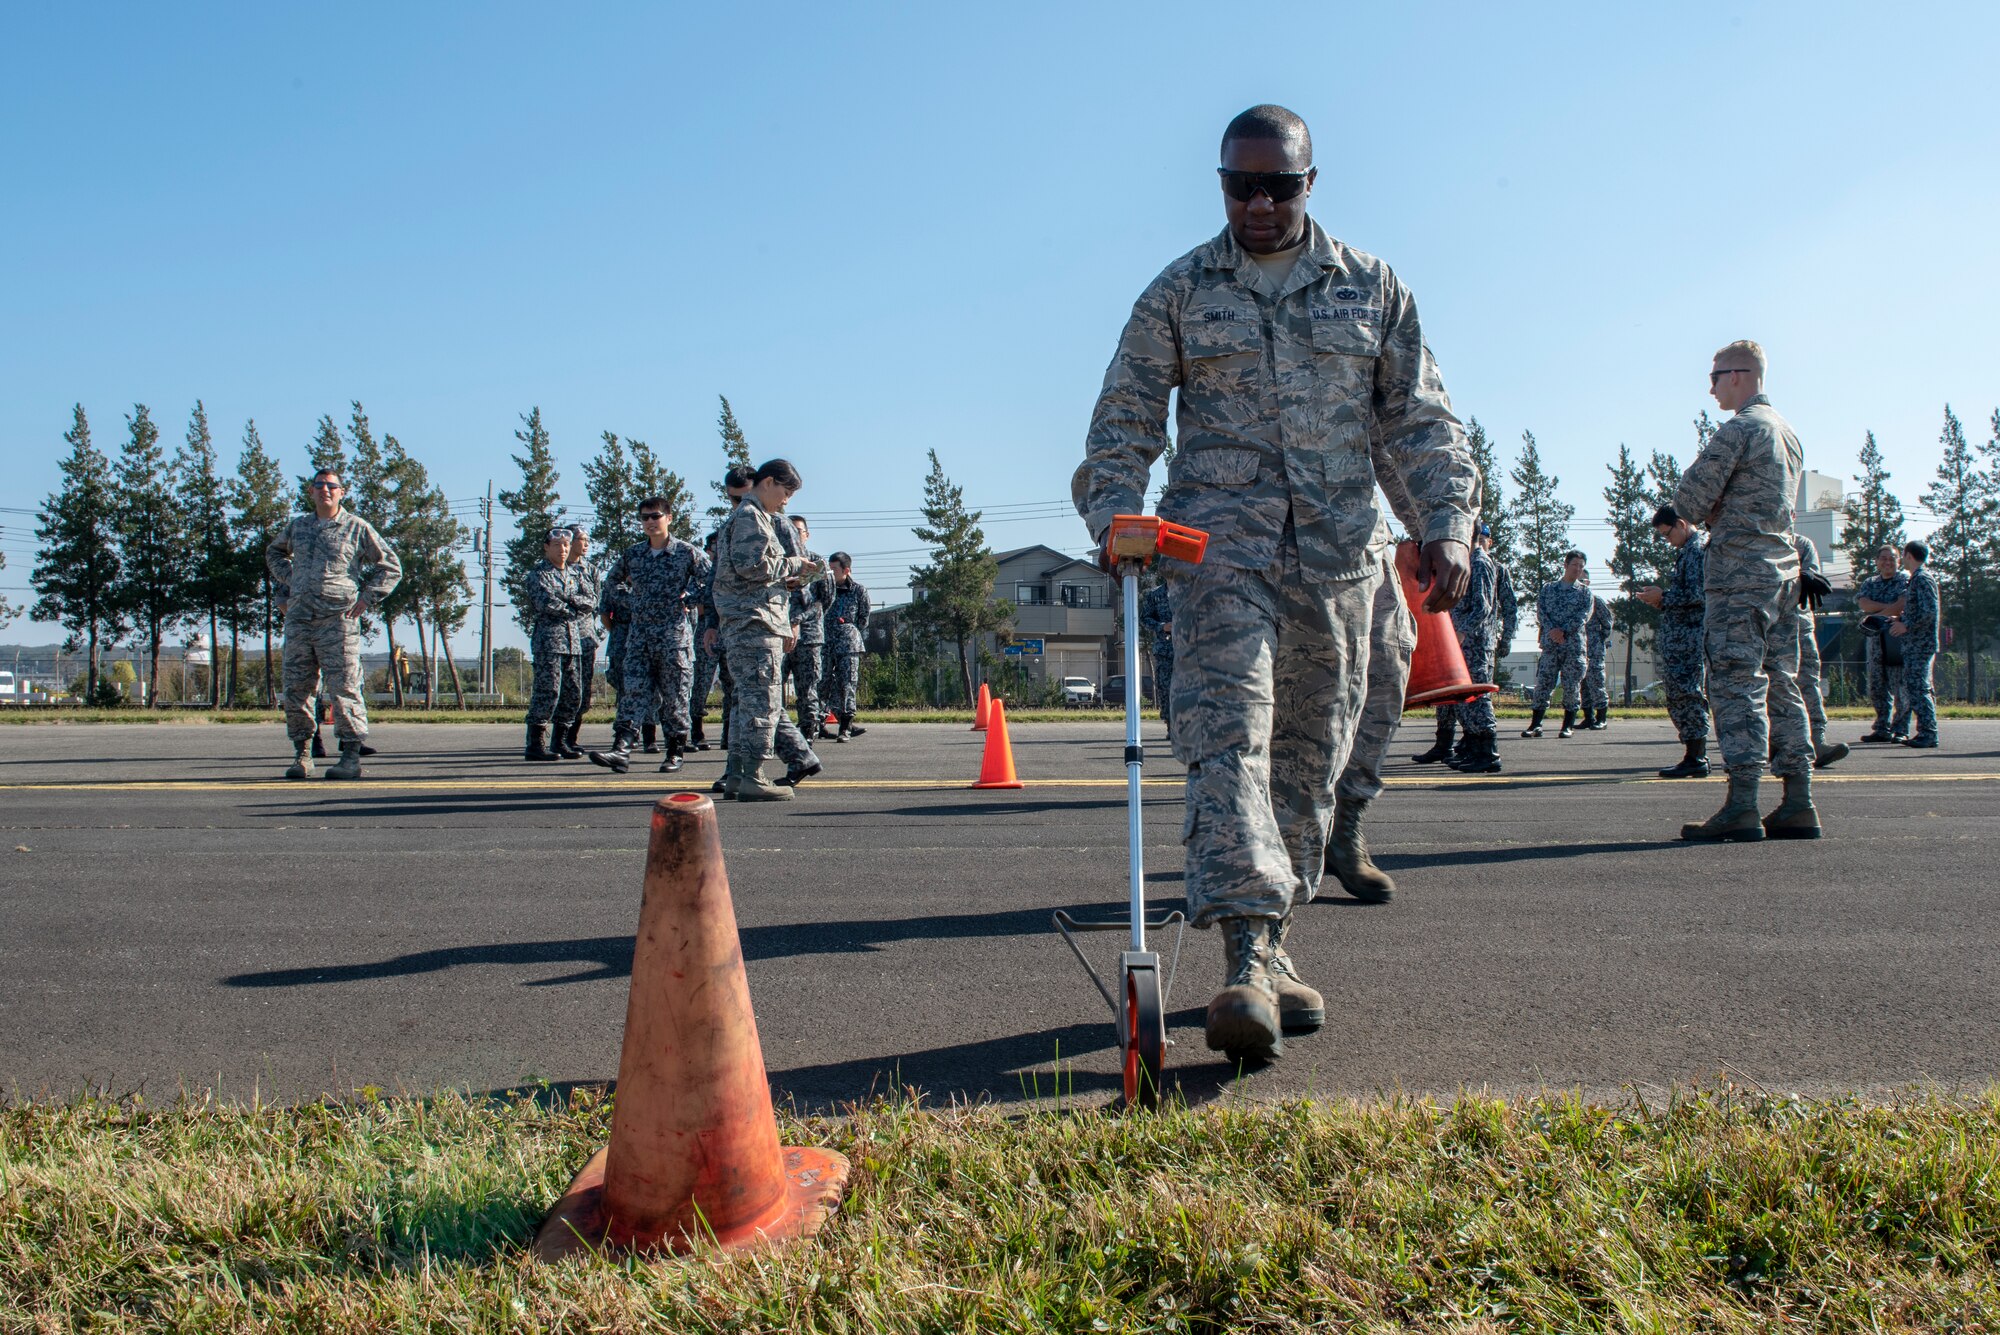 U.S. Air Force Tech. Sgt. Romain Smith, 374th Civil Engineer Squadron electrical power production, measures the width of the runway prior to installing the Mobile Aircraft Arresting System (MAAS) with the help of the Koku Jietai (Japan Air Self-Defense Force) as part of bilateral training at Yokota Air Base, Japan, Oct. 25, 2018.